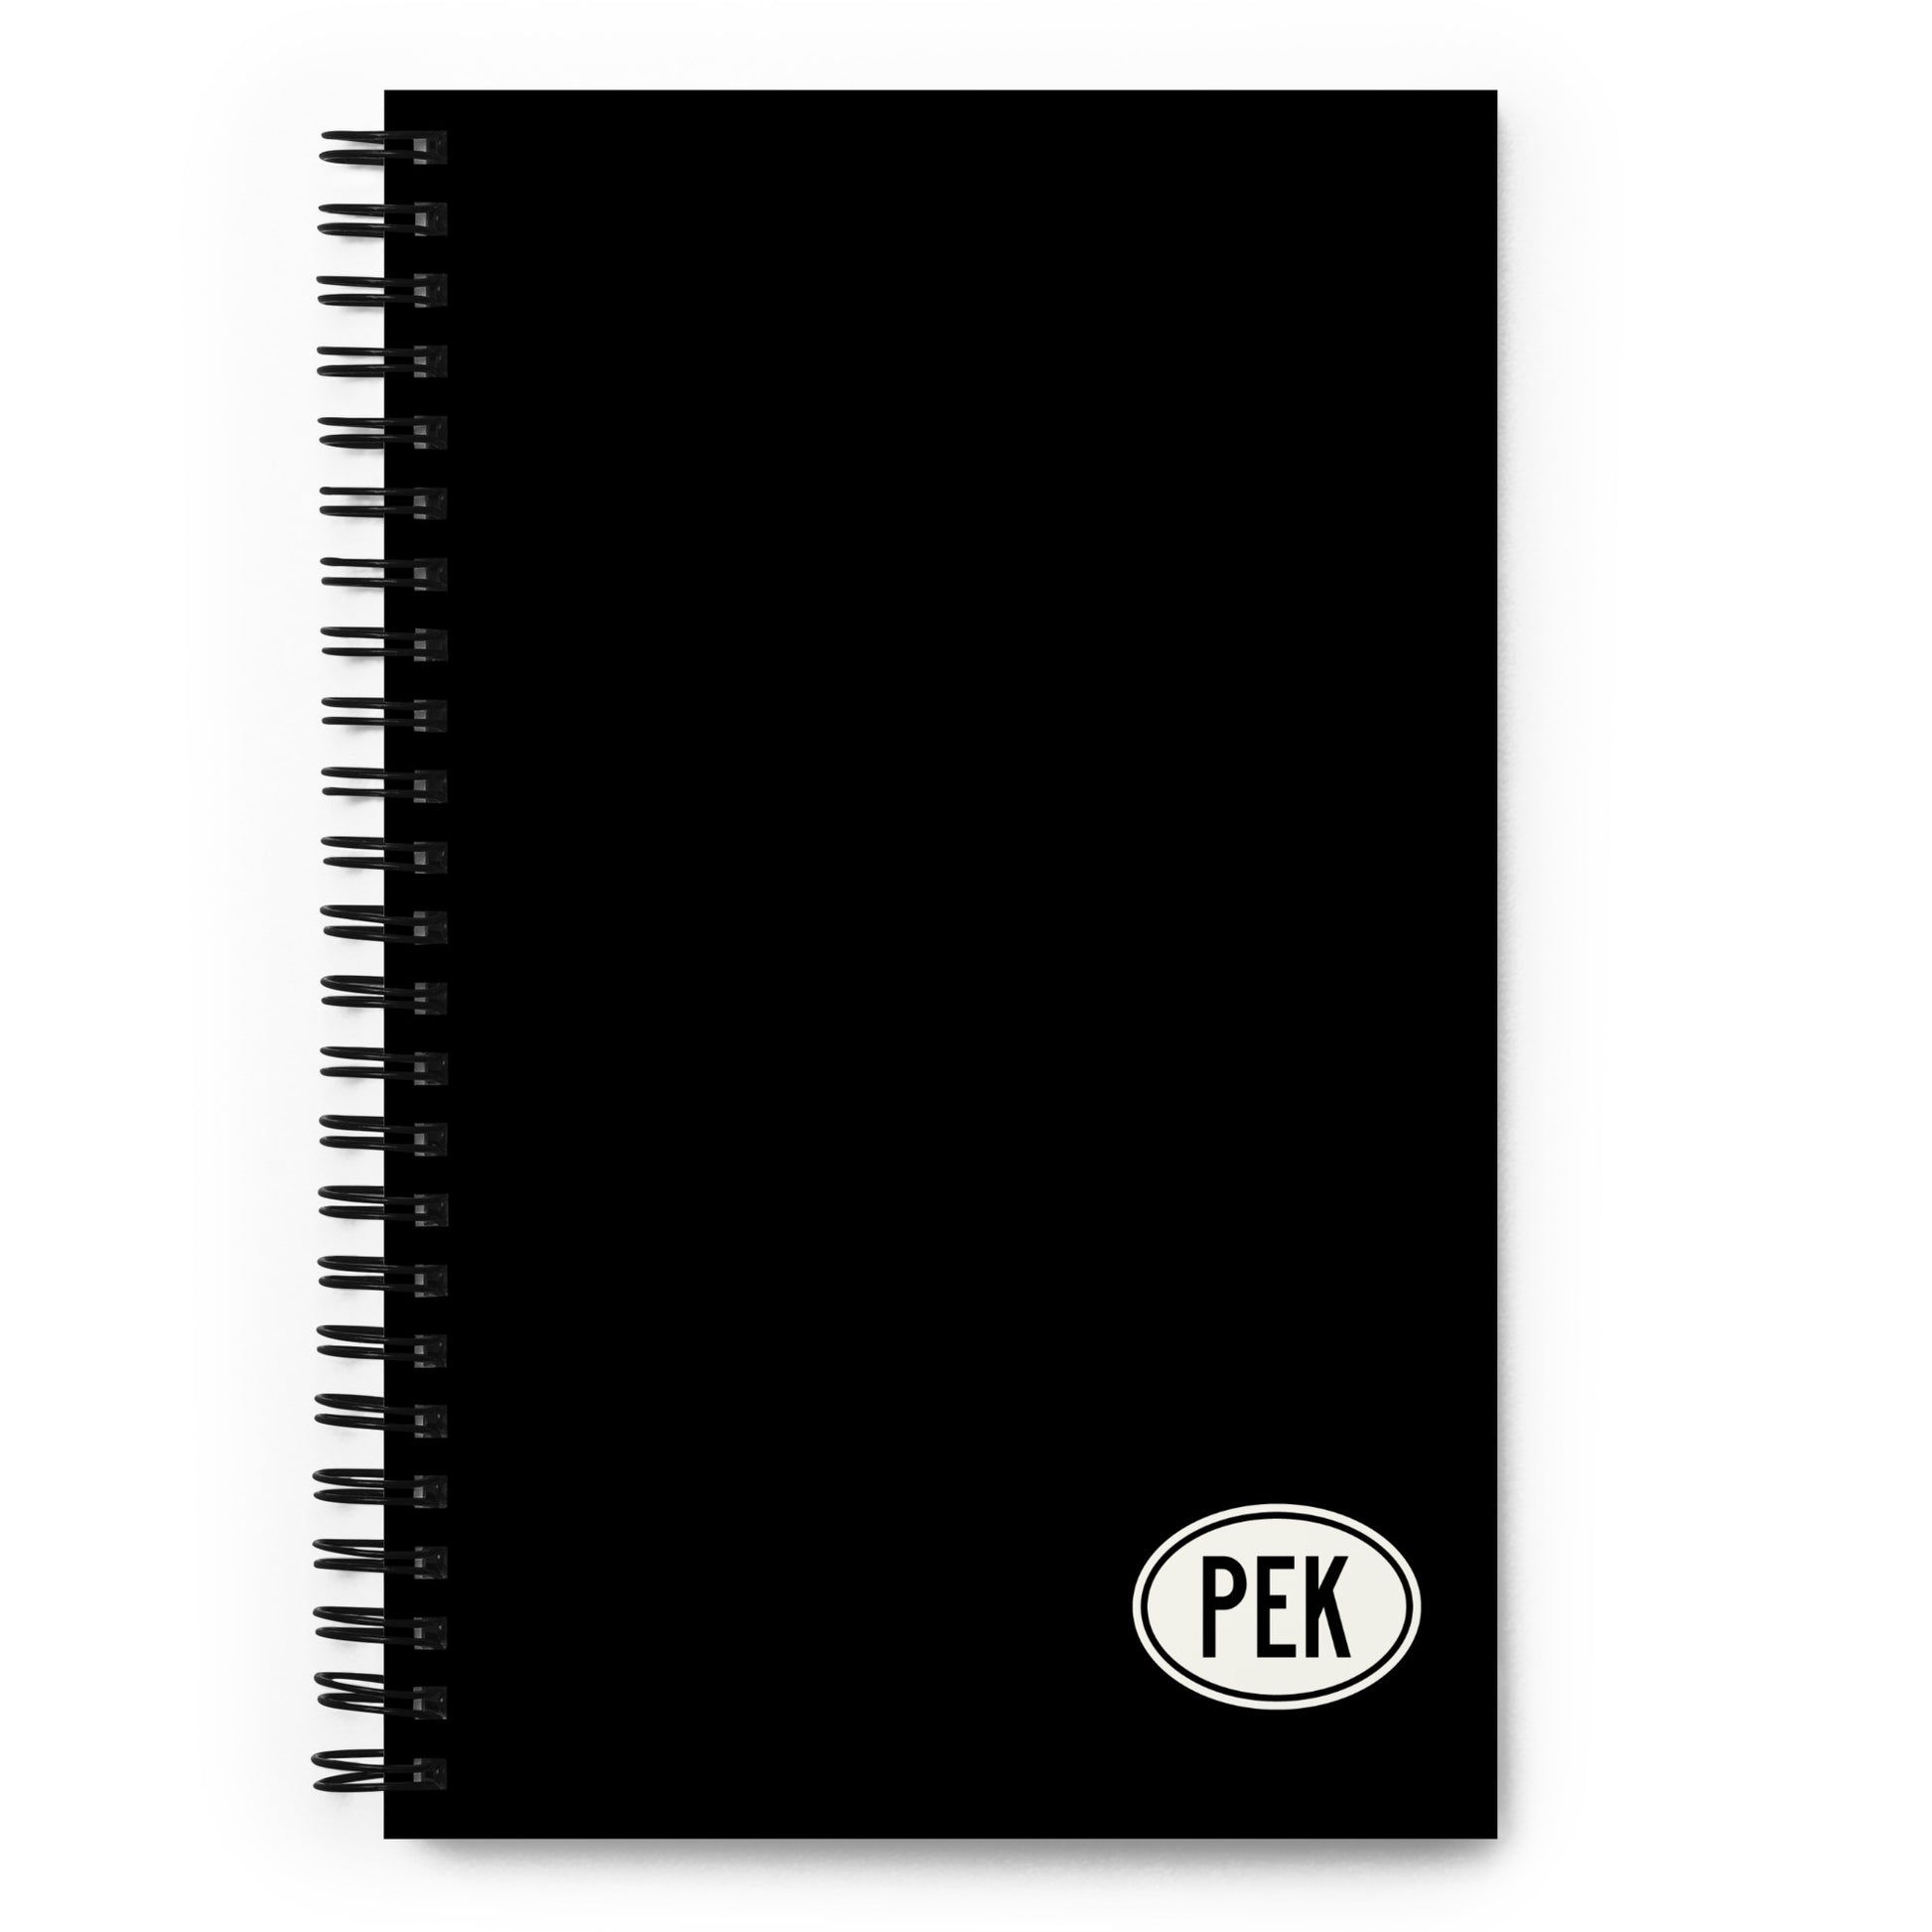 Unique Travel Gift Spiral Notebook - White Oval • PEK Beijing • YHM Designs - Image 01